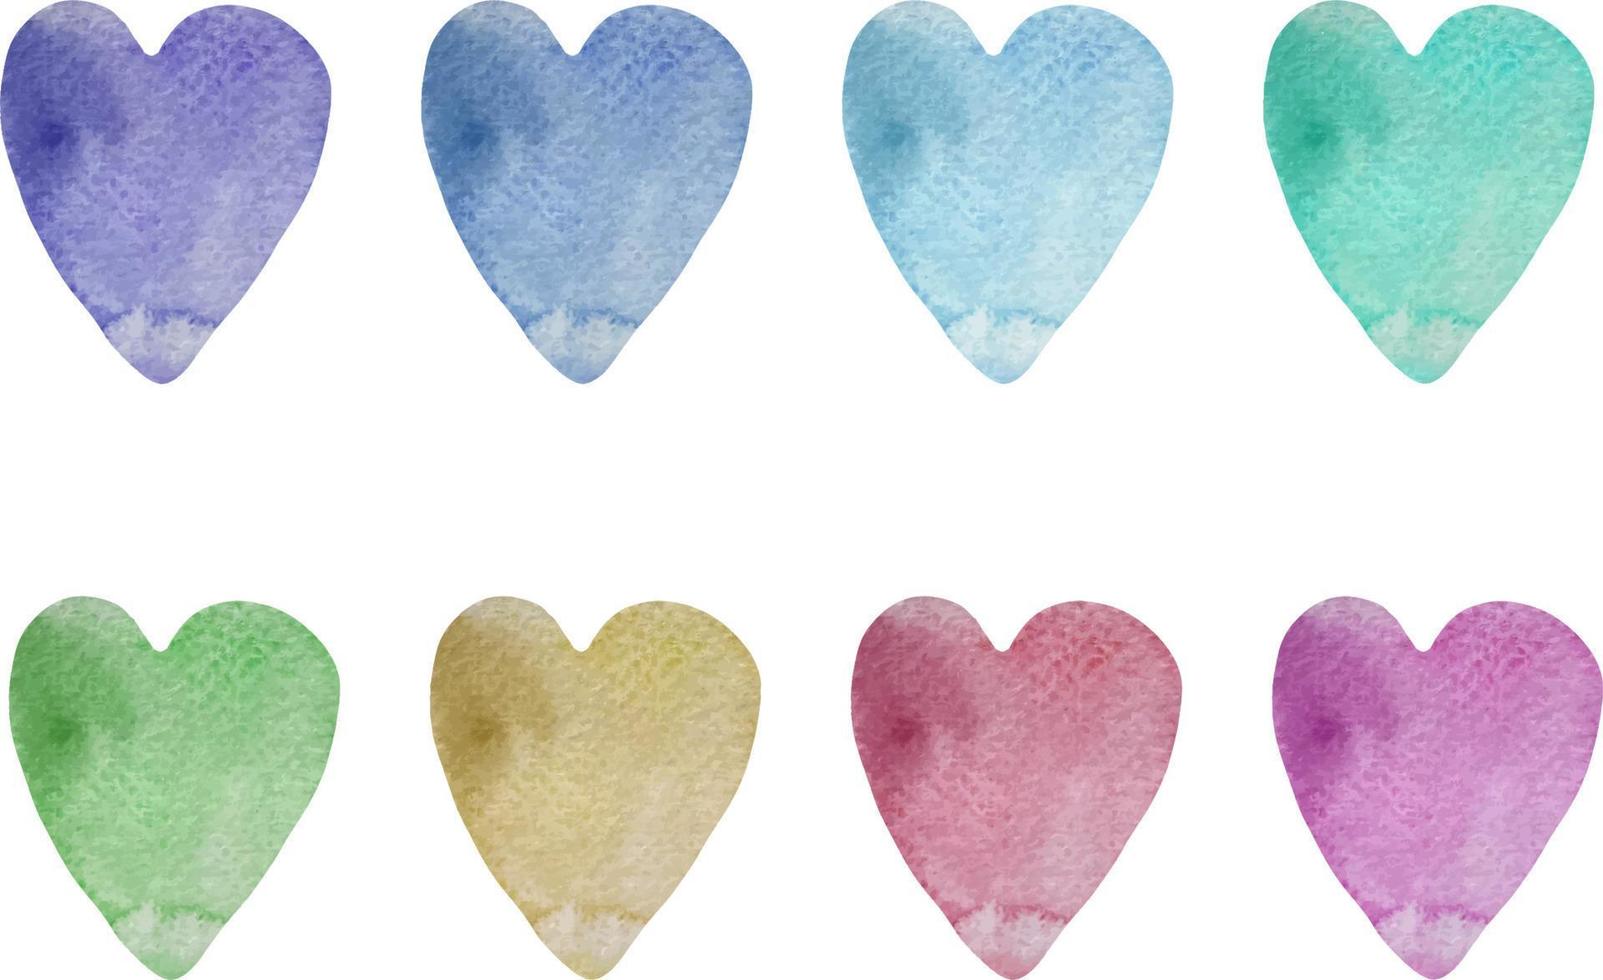 Watercolor rainbow colors hearts set. Romantic cute design element for valentines day card. vector